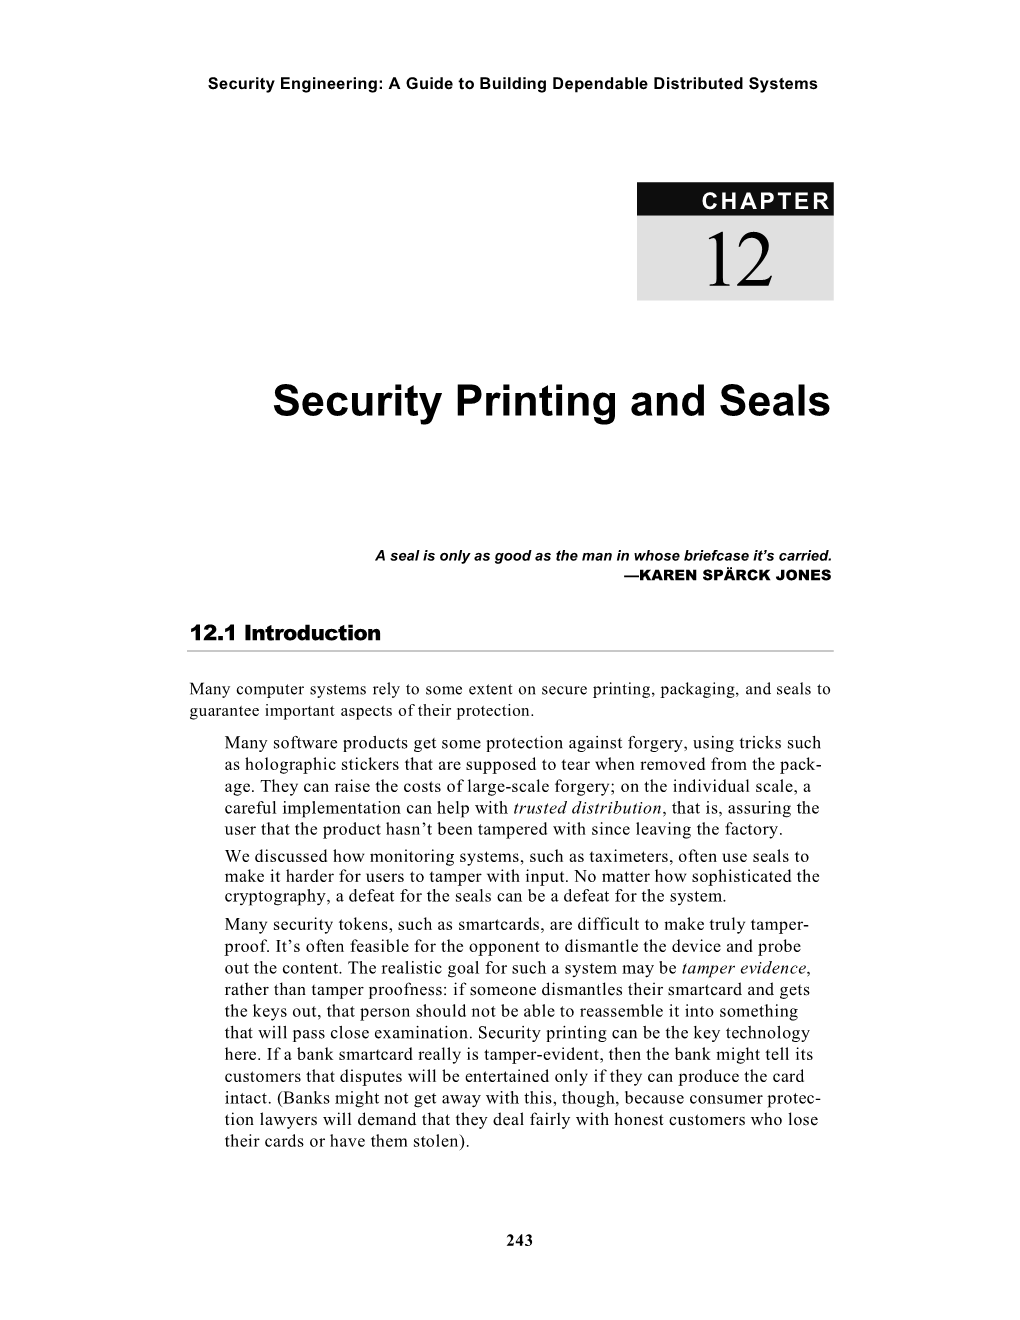 Security Printing and Seals